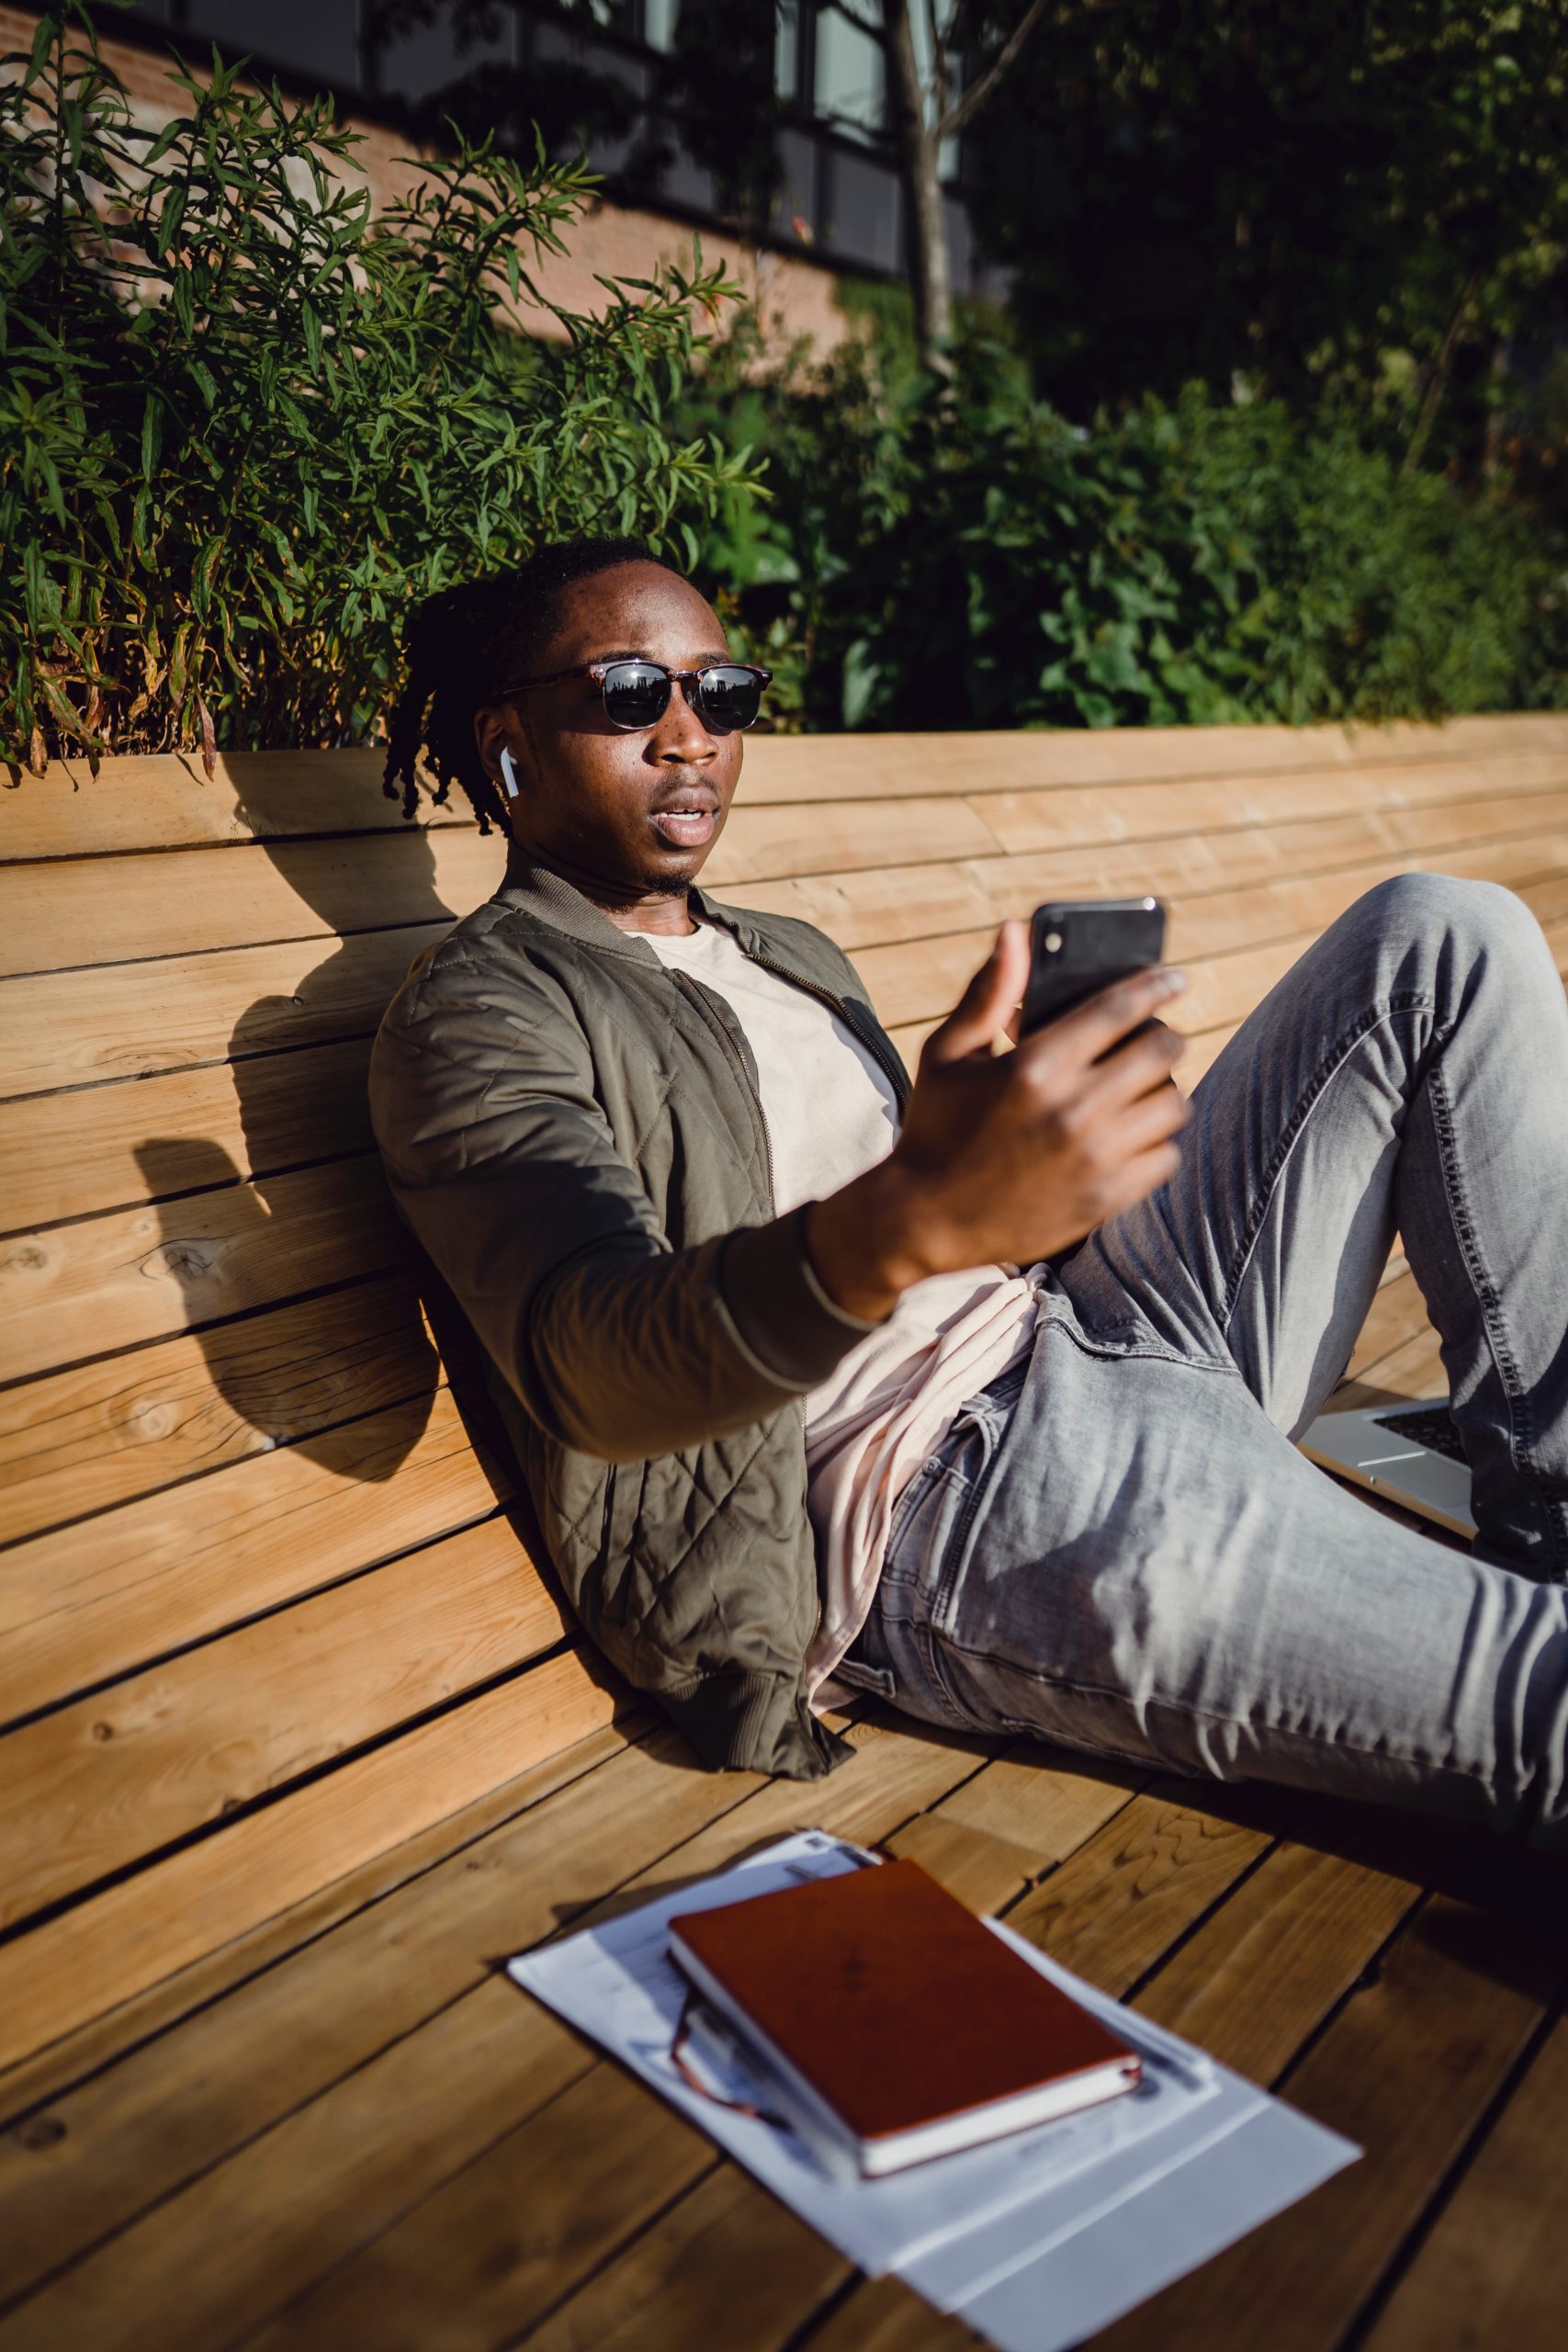 A Black man sitting on a bench looking at his phone